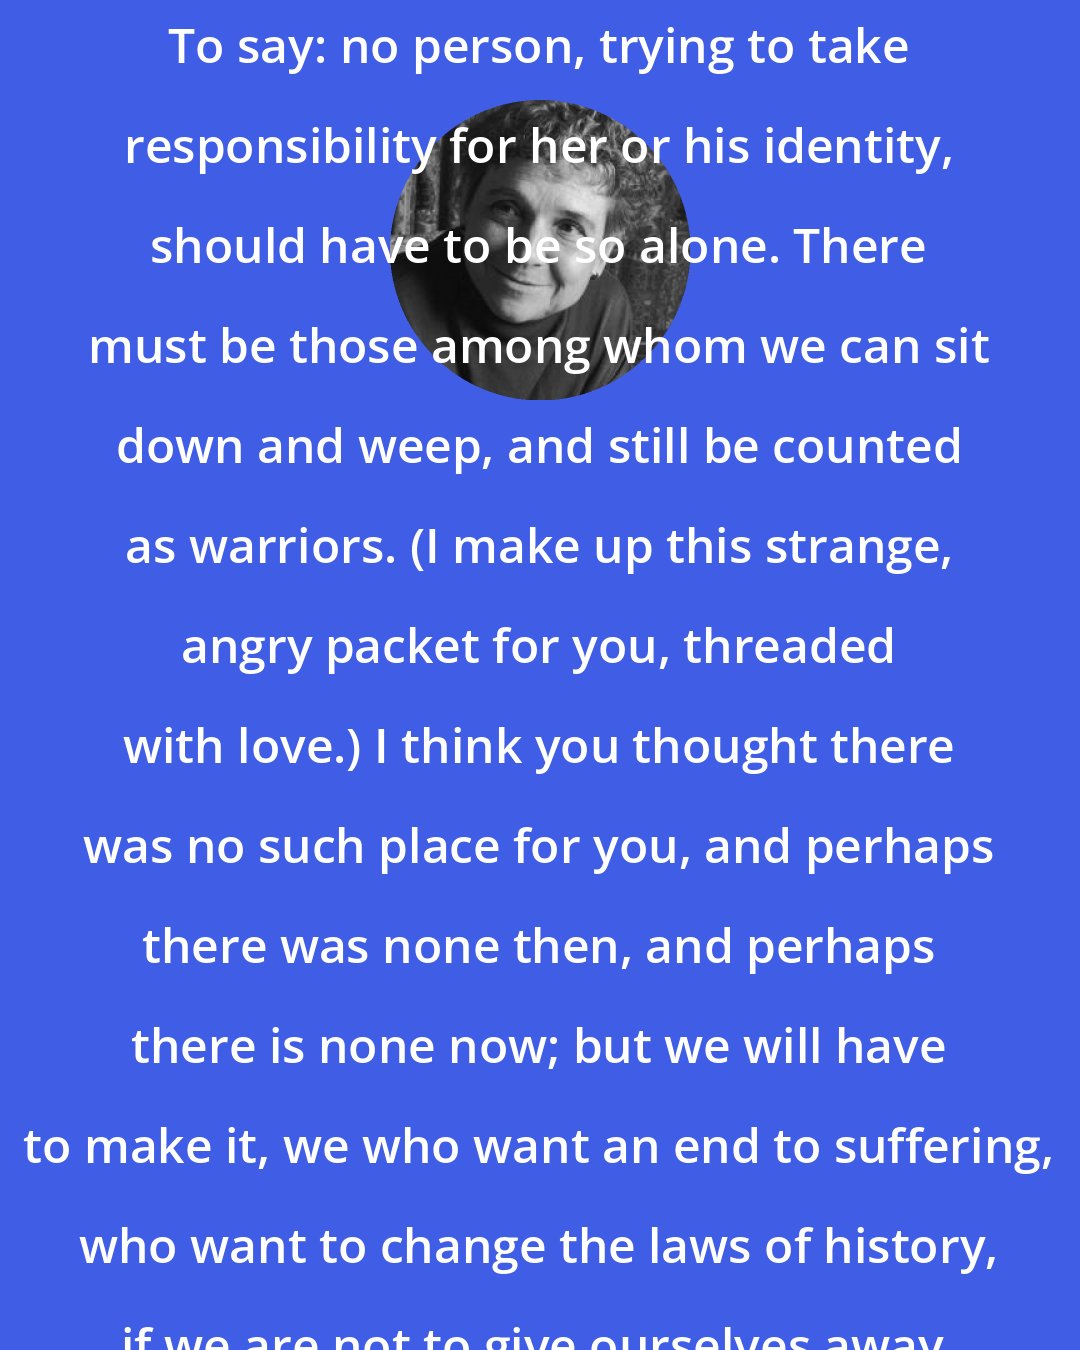 Adrienne Rich: That's why I want to speak to you now. To say: no person, trying to take responsibility for her or his identity, should have to be so alone. There must be those among whom we can sit down and weep, and still be counted as warriors. (I make up this strange, angry packet for you, threaded with love.) I think you thought there was no such place for you, and perhaps there was none then, and perhaps there is none now; but we will have to make it, we who want an end to suffering, who want to change the laws of history, if we are not to give ourselves away.